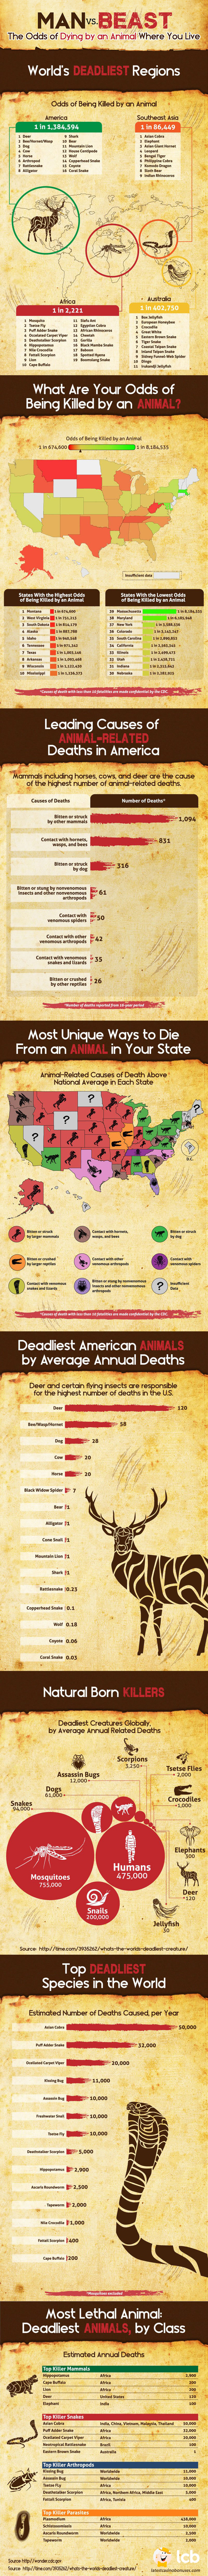 What Animal Causes the Most Human Deaths Infographic